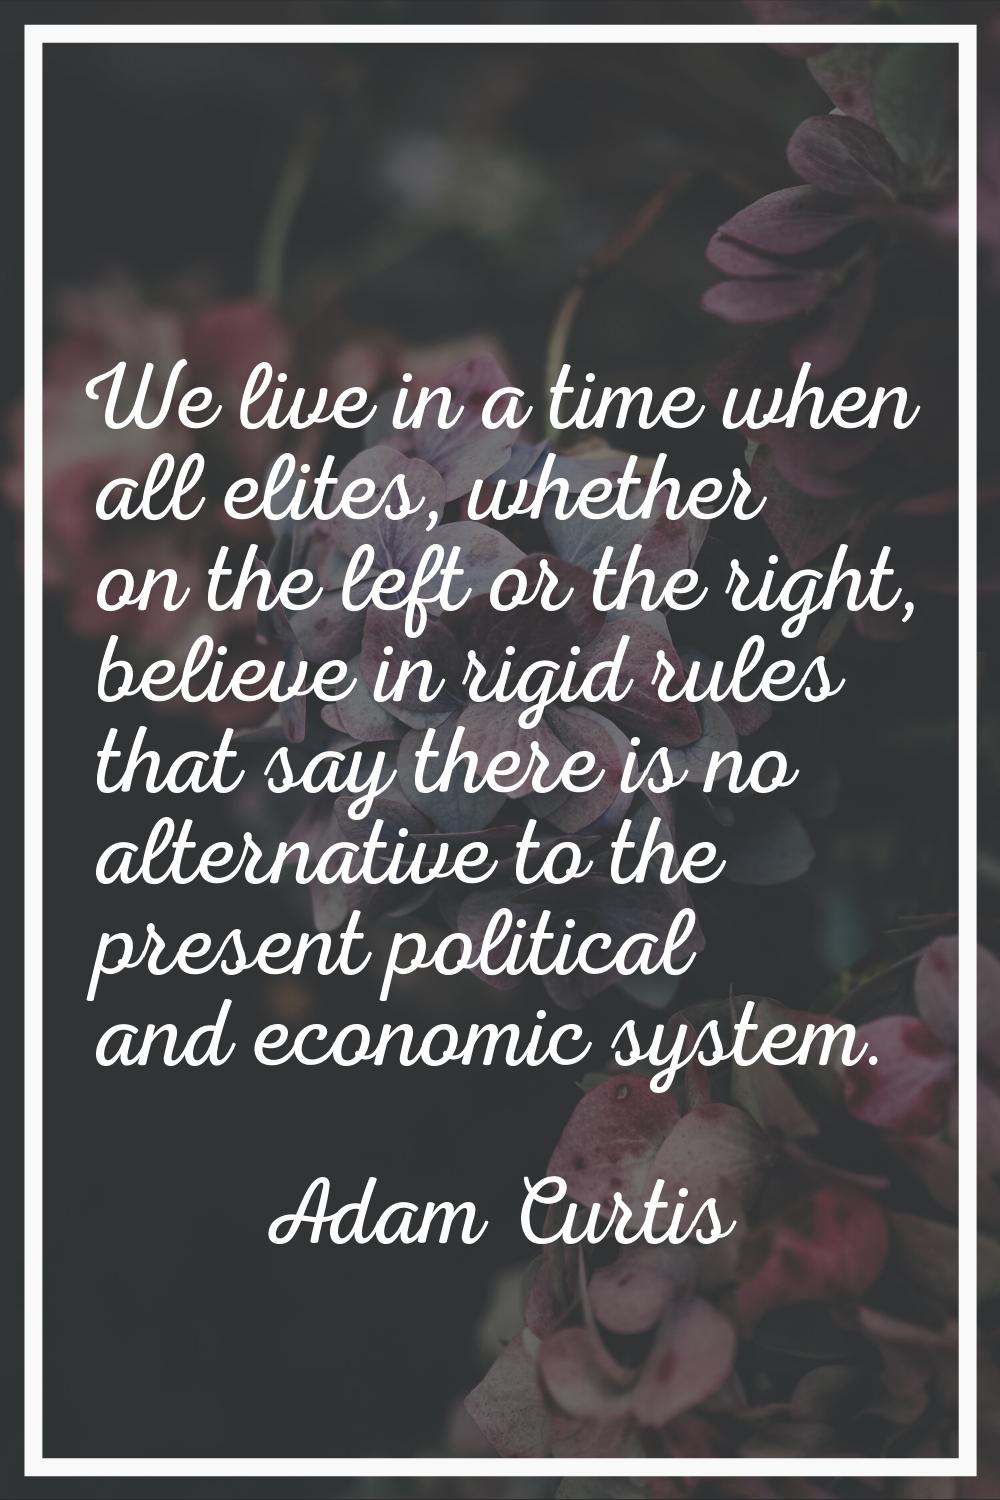 We live in a time when all elites, whether on the left or the right, believe in rigid rules that sa